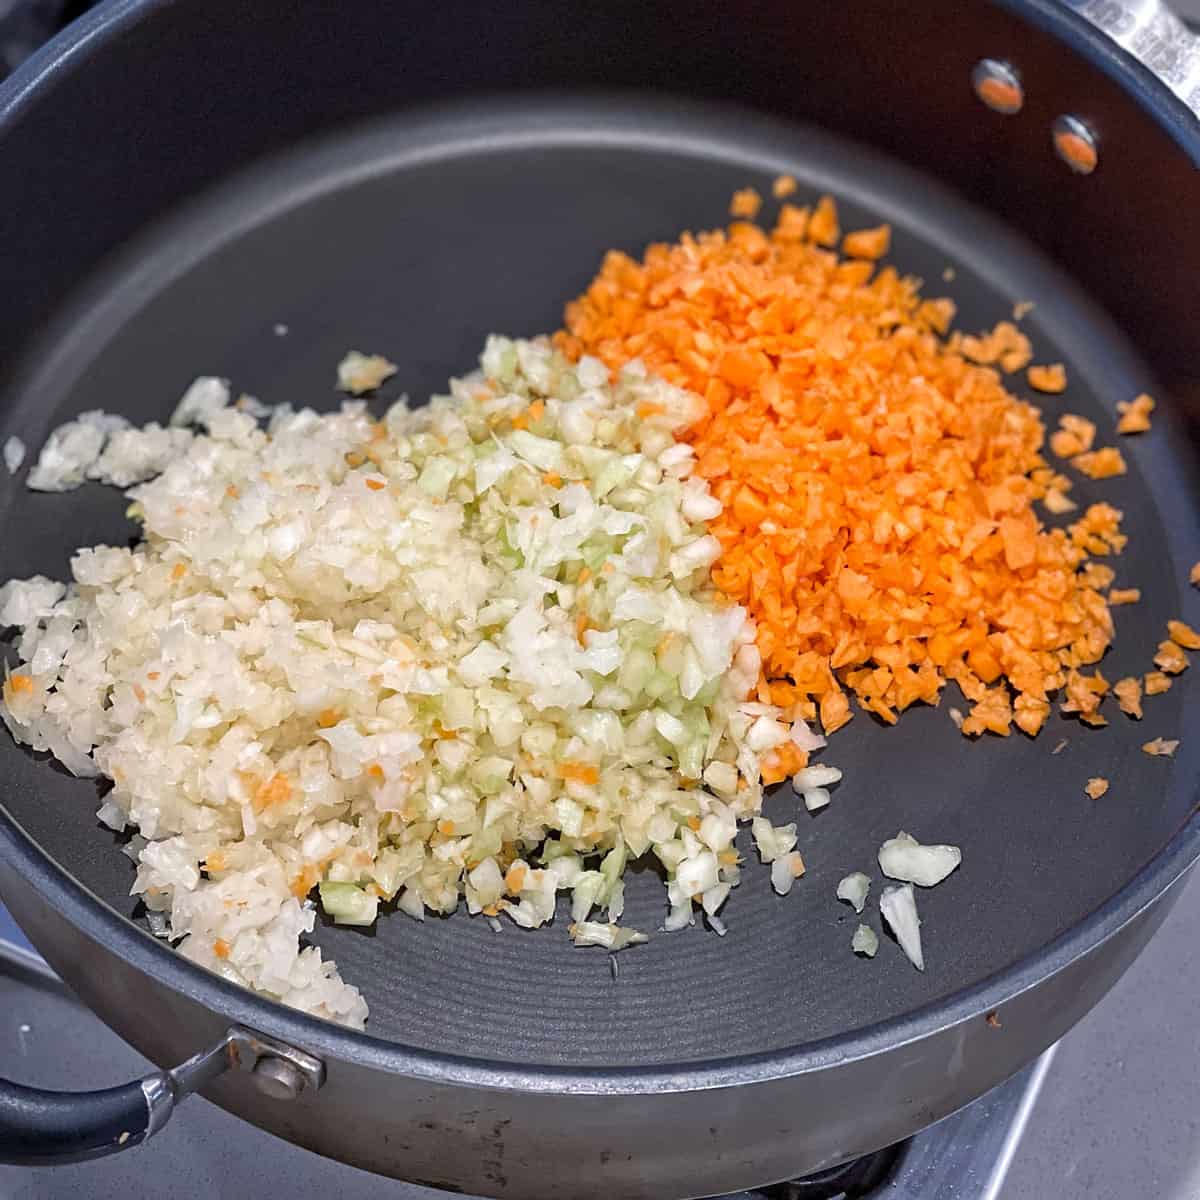 Diced vegetables cooking in a pan